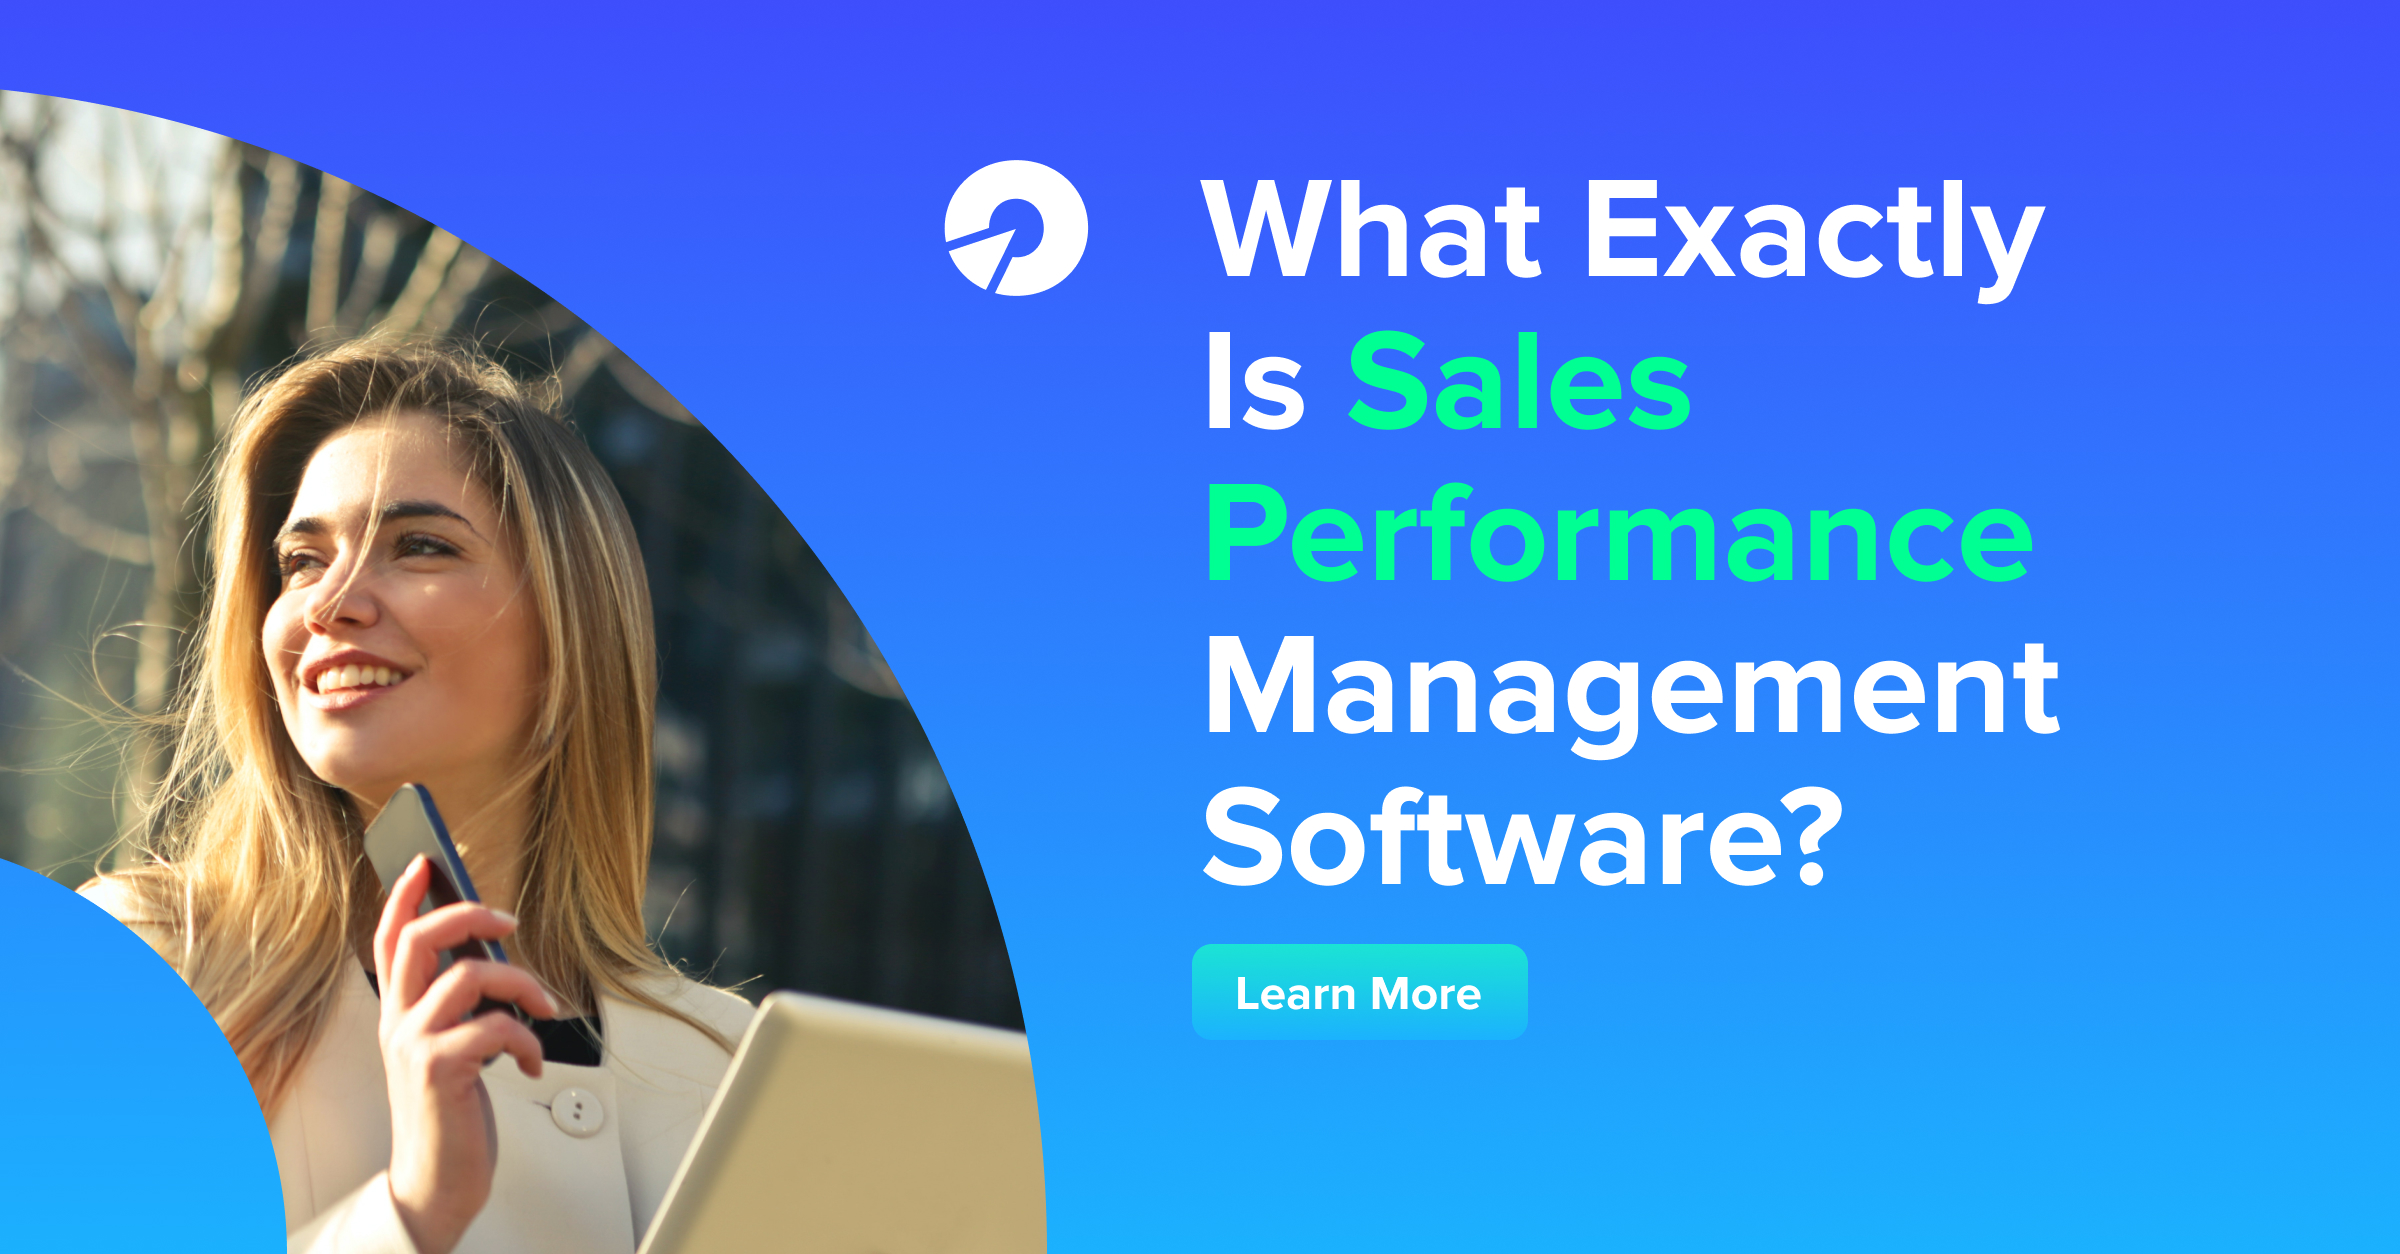 What Exactly Is Sales Performance Management Software?